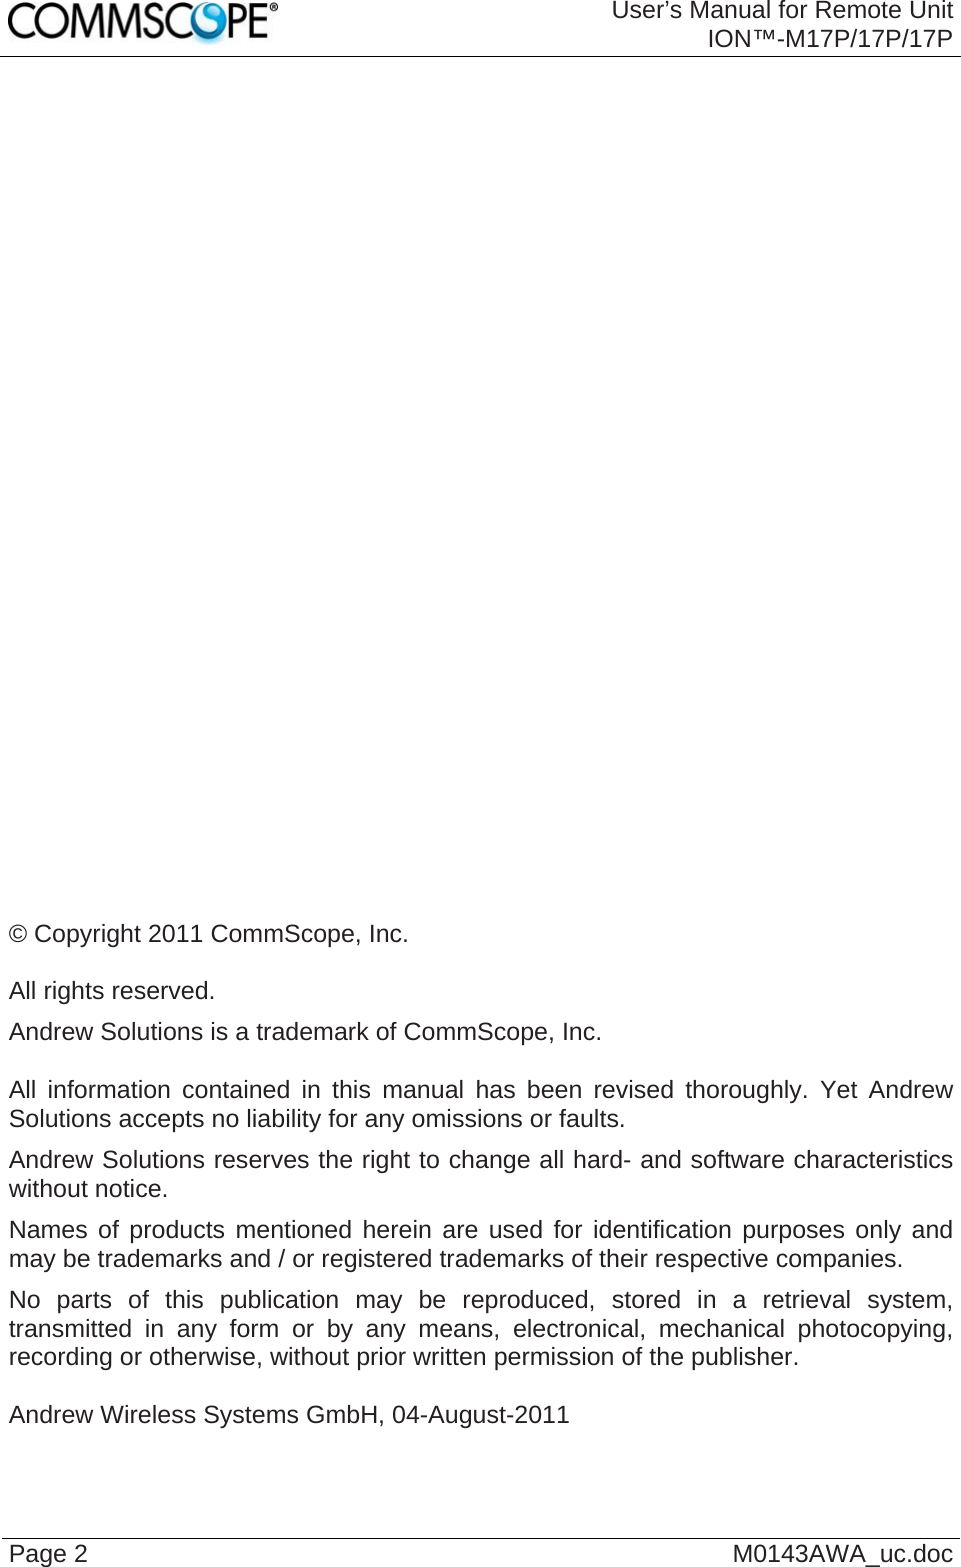  User’s Manual for Remote Unit ION™-M17P/17P/17P Page 2  M0143AWA_uc.doc                              © Copyright 2011 CommScope, Inc.  All rights reserved. Andrew Solutions is a trademark of CommScope, Inc.  All information contained in this manual has been revised thoroughly. Yet Andrew Solutions accepts no liability for any omissions or faults. Andrew Solutions reserves the right to change all hard- and software characteristics without notice. Names of products mentioned herein are used for identification purposes only and may be trademarks and / or registered trademarks of their respective companies. No parts of this publication may be reproduced, stored in a retrieval system, transmitted in any form or by any means, electronical, mechanical photocopying, recording or otherwise, without prior written permission of the publisher.  Andrew Wireless Systems GmbH, 04-August-2011  